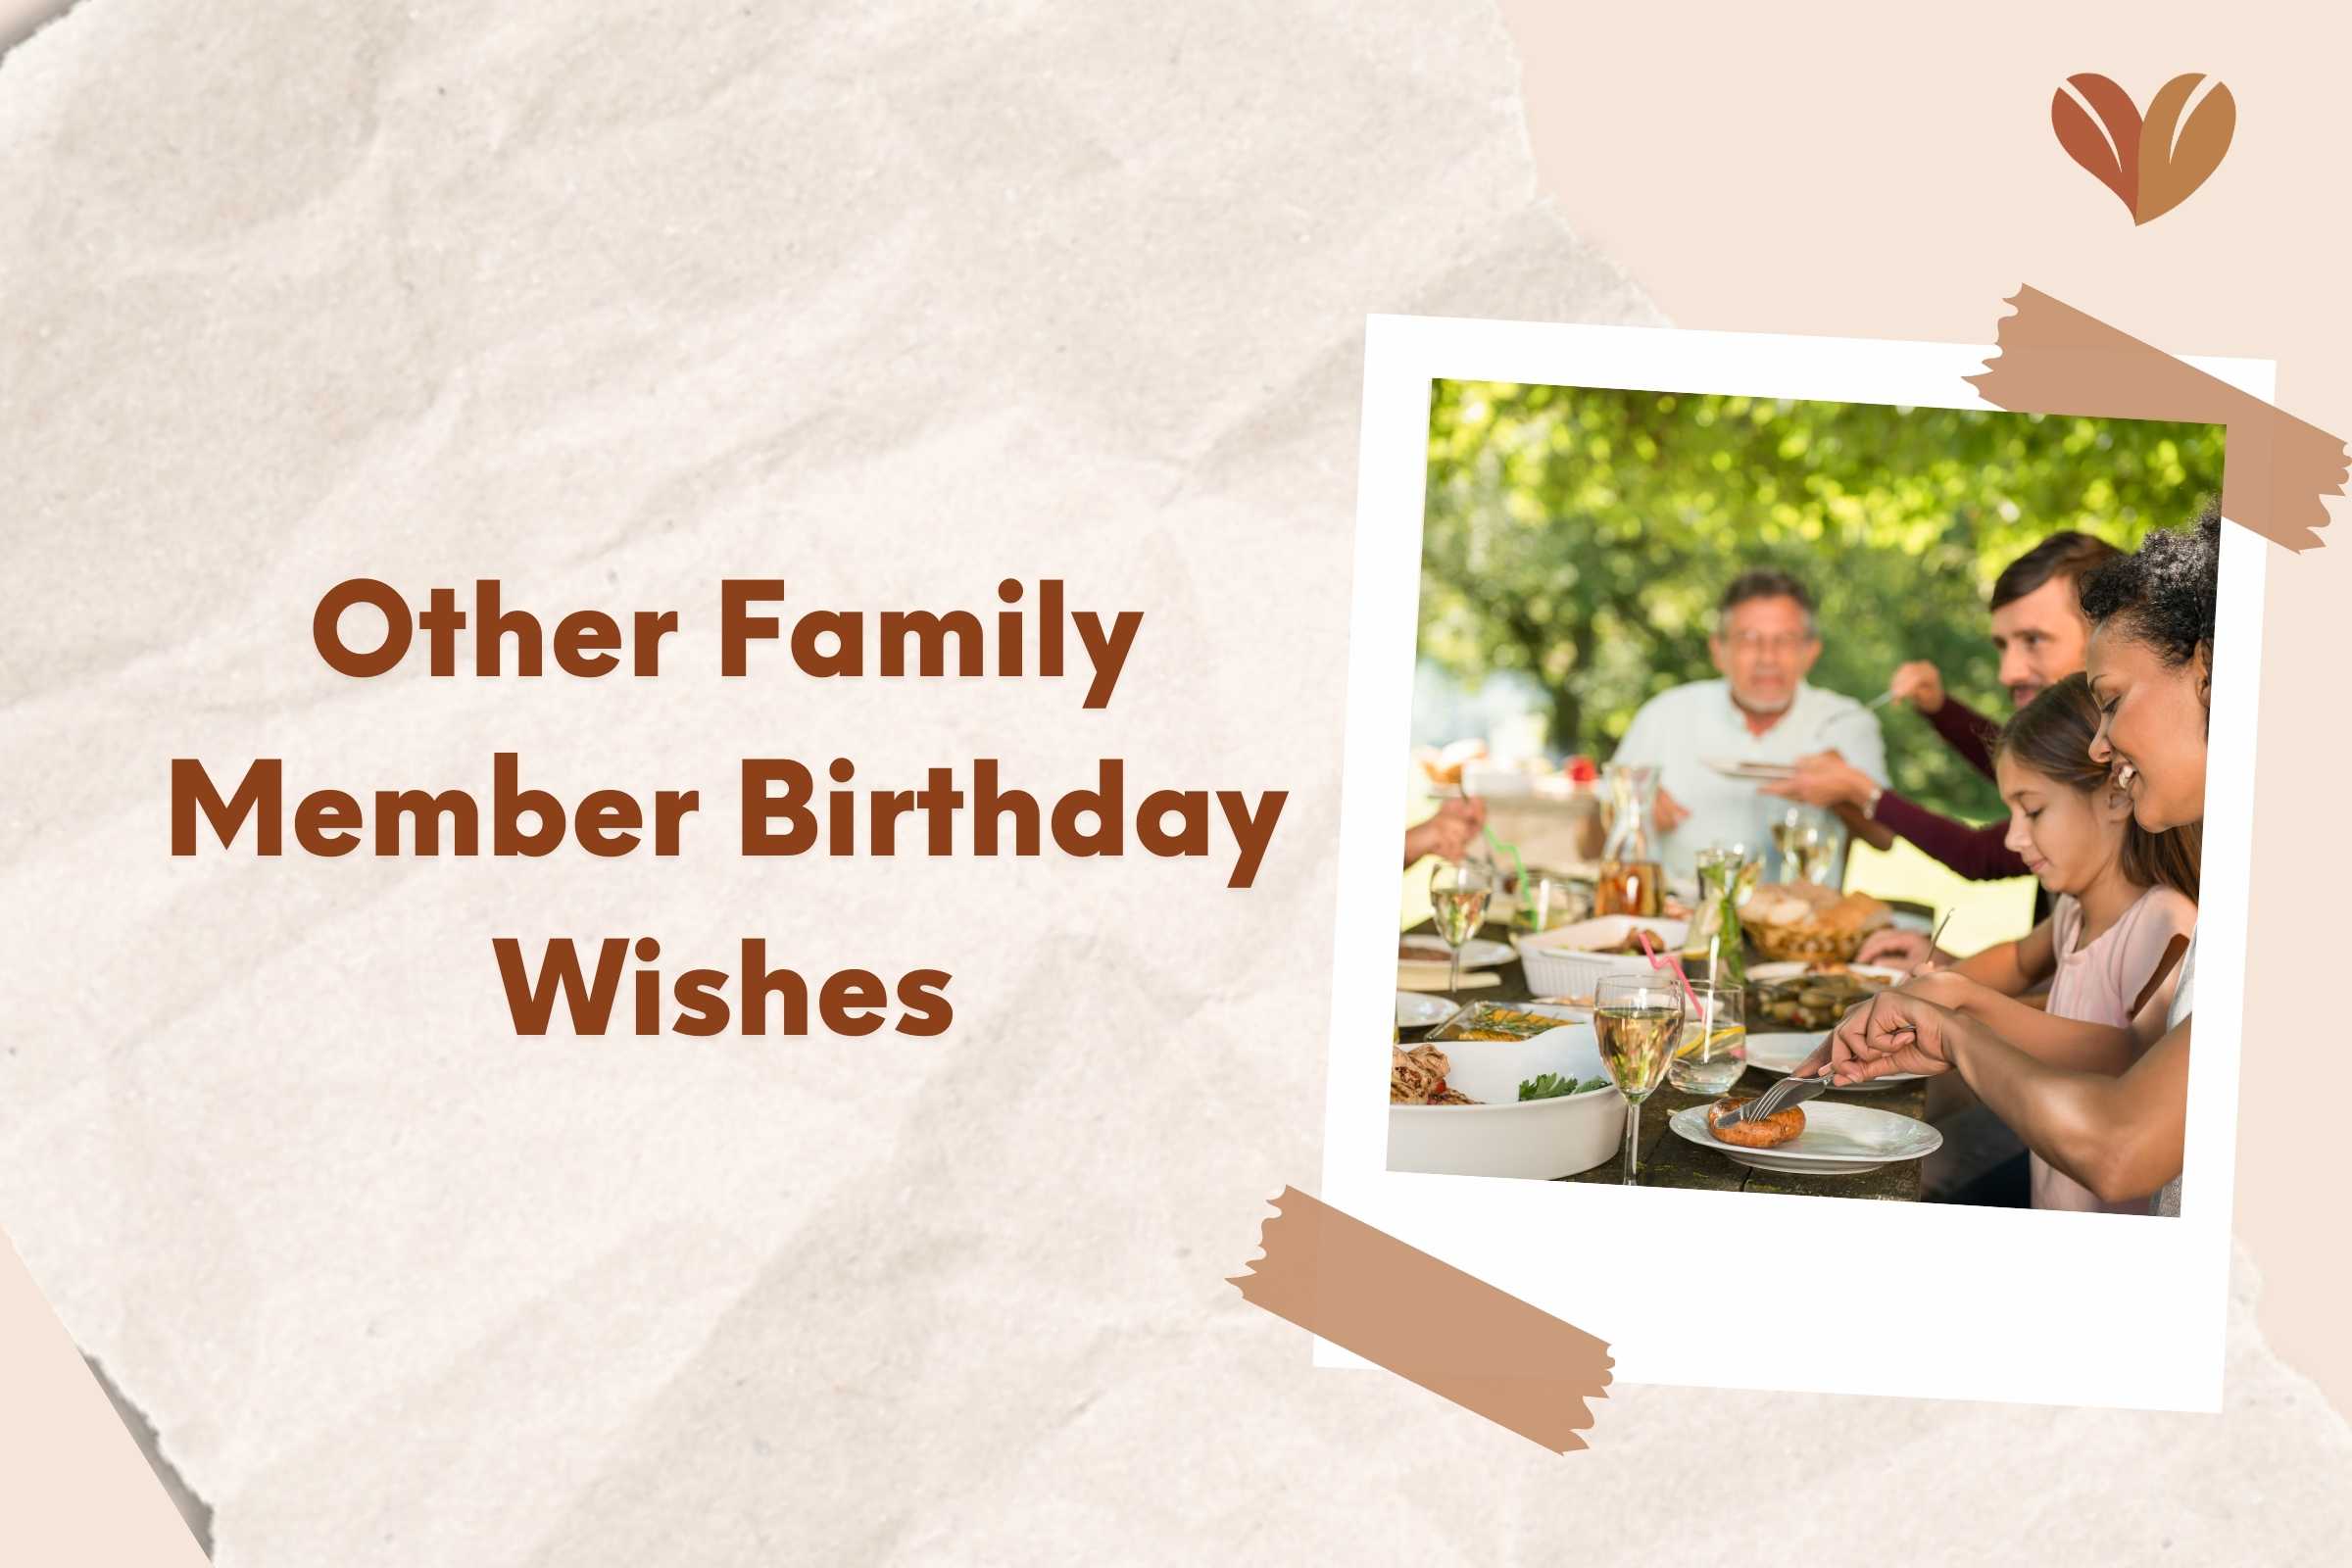 Cherishing family connections through these wishes, a day of celebration.